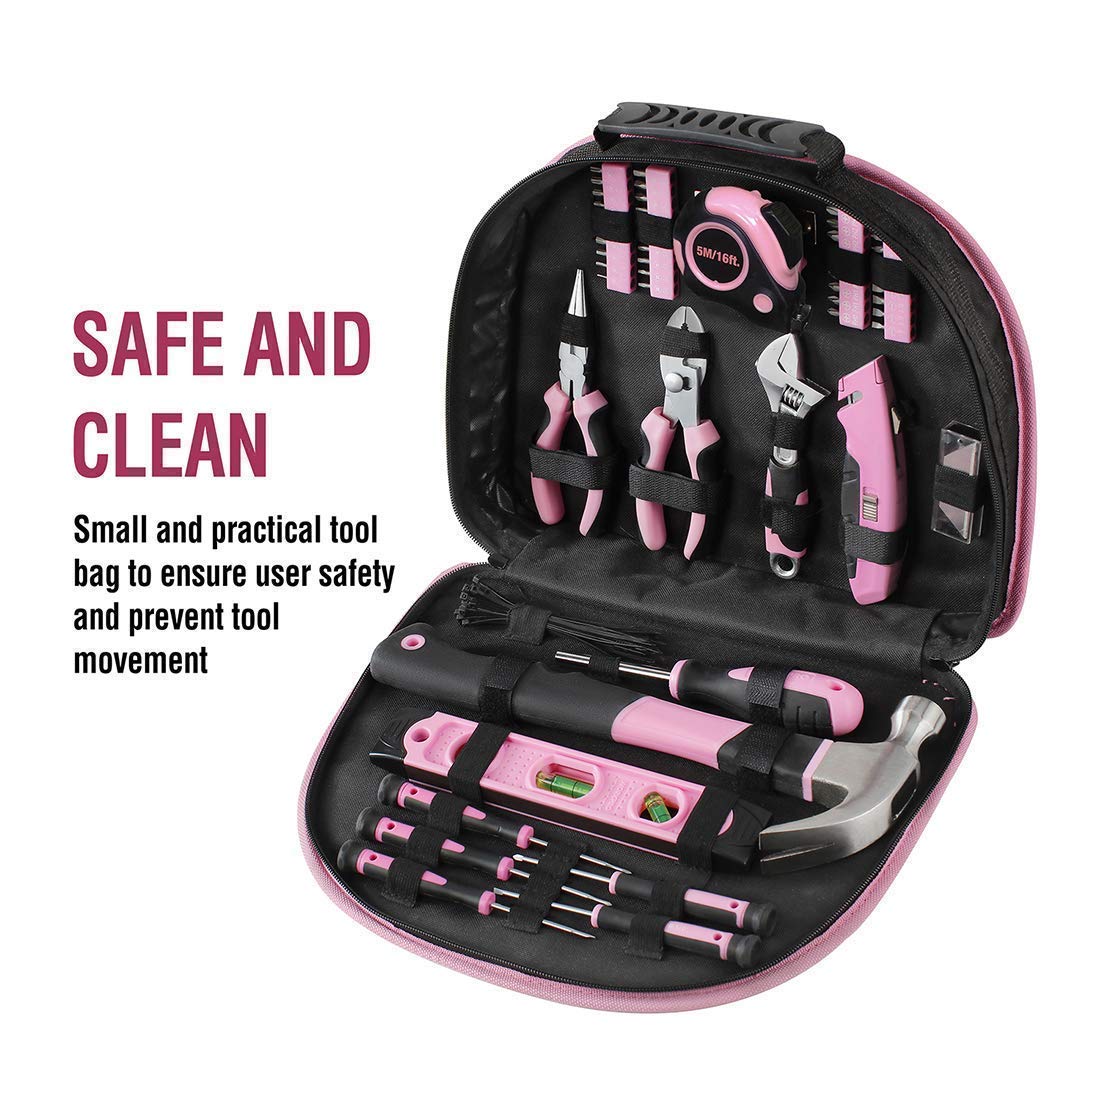 WORKPRO Pink Cordless 20V Lithium-ion Drill Driver Set with Storage Bag and 103-Piece Pink Tool Kit with Easy Carrying Round Pouch